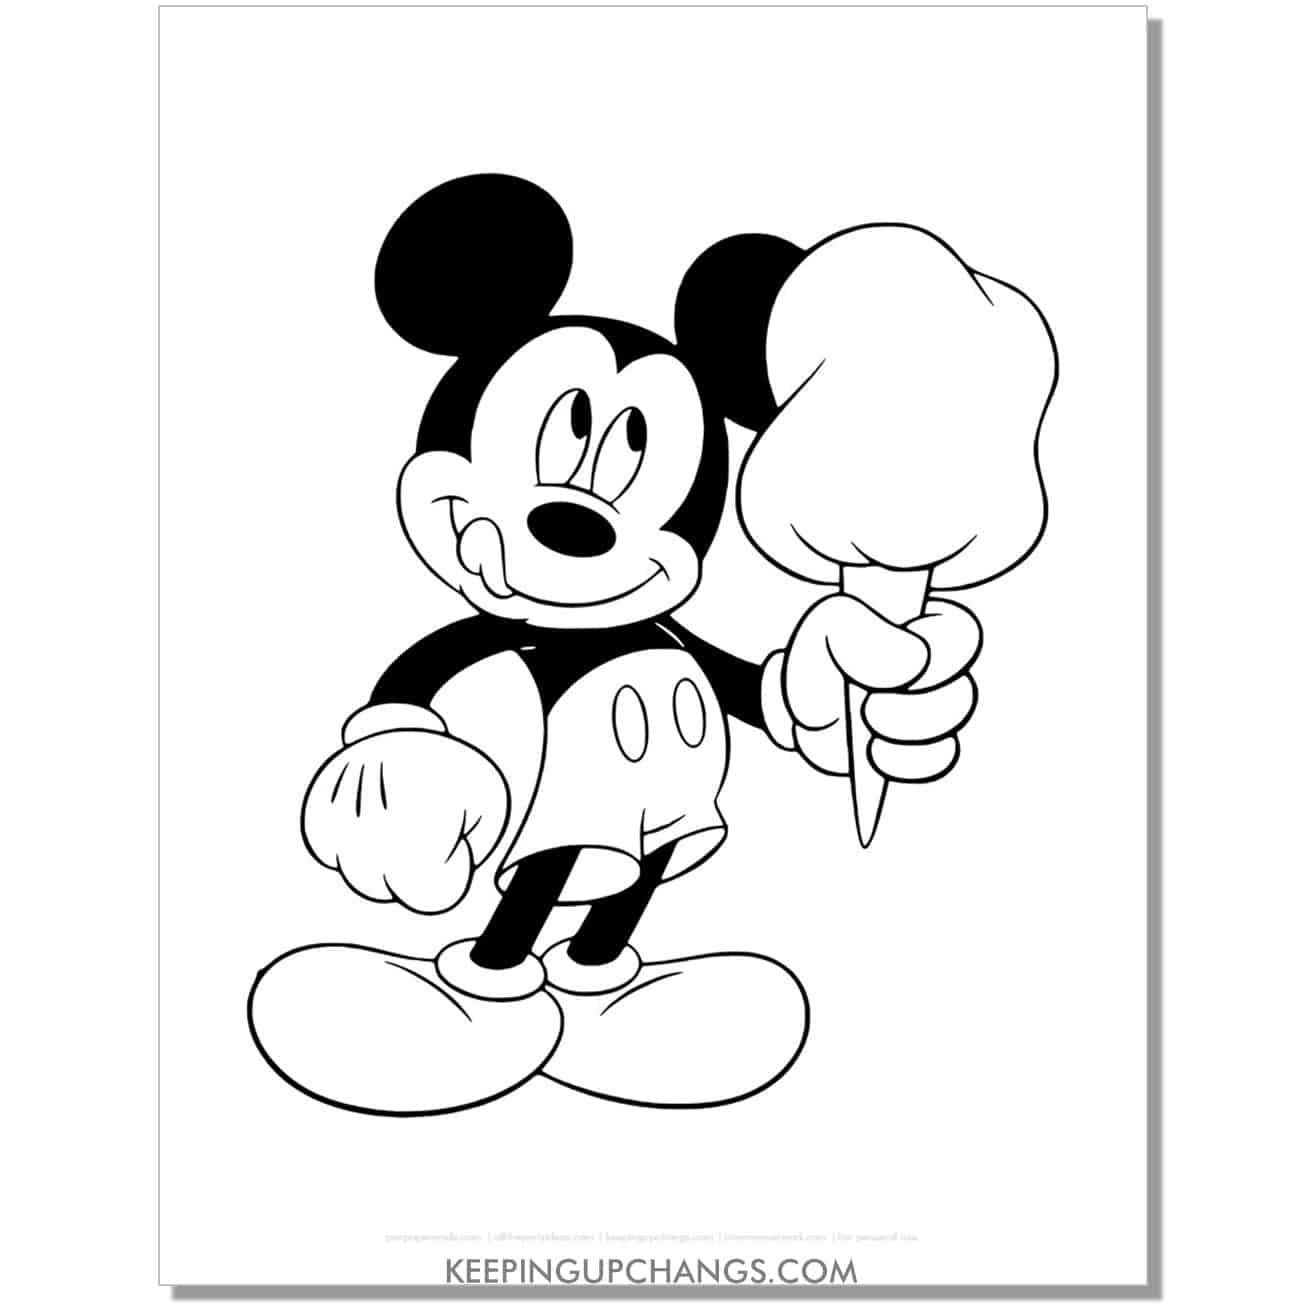 free mickey mouse holding large ice cream cone coloring page, sheet.